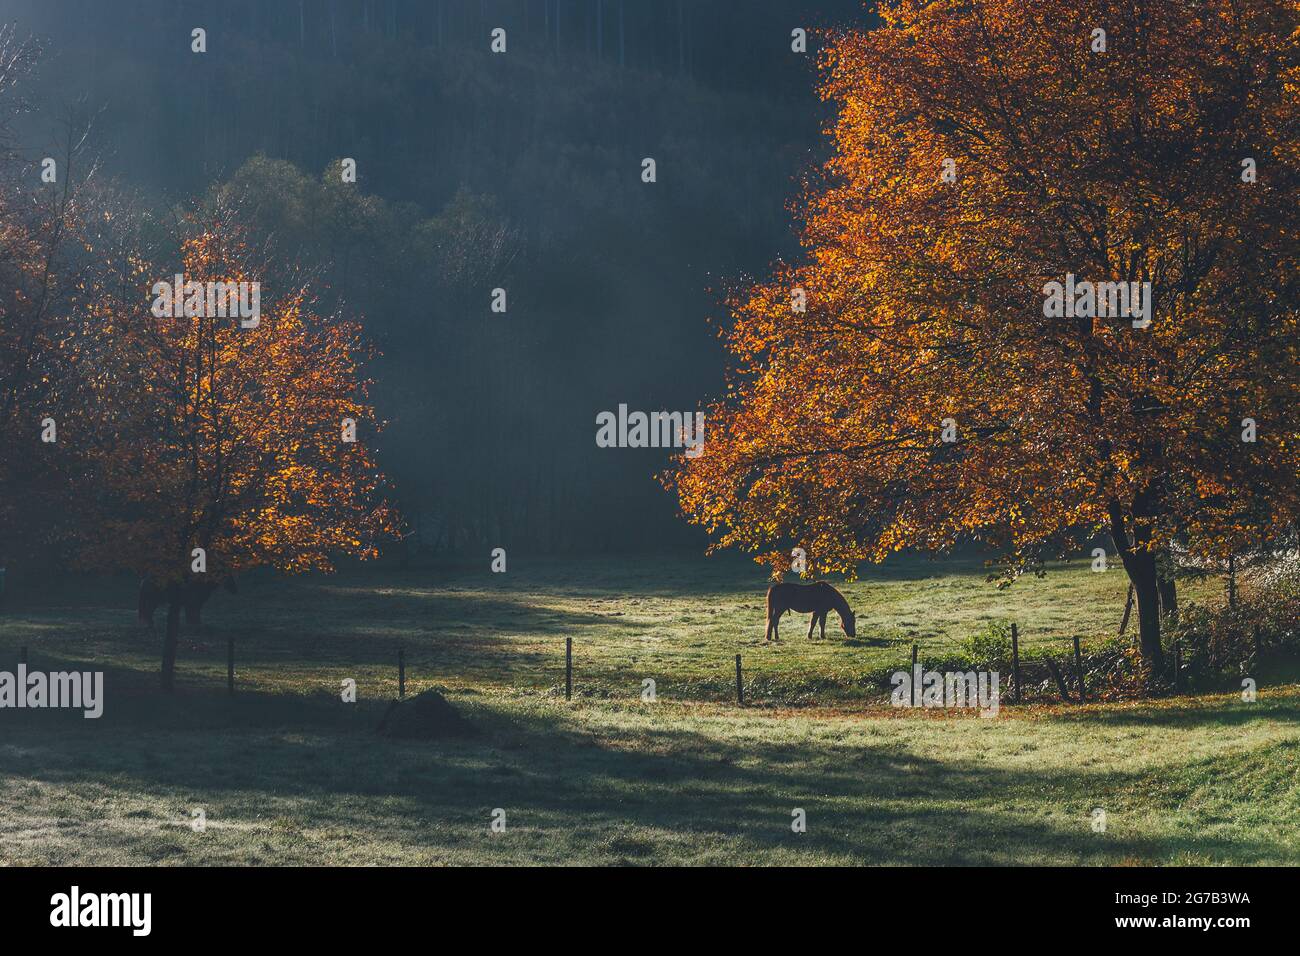 Meadow with horse in autumn, Eifel National Park, Germany Stock Photo